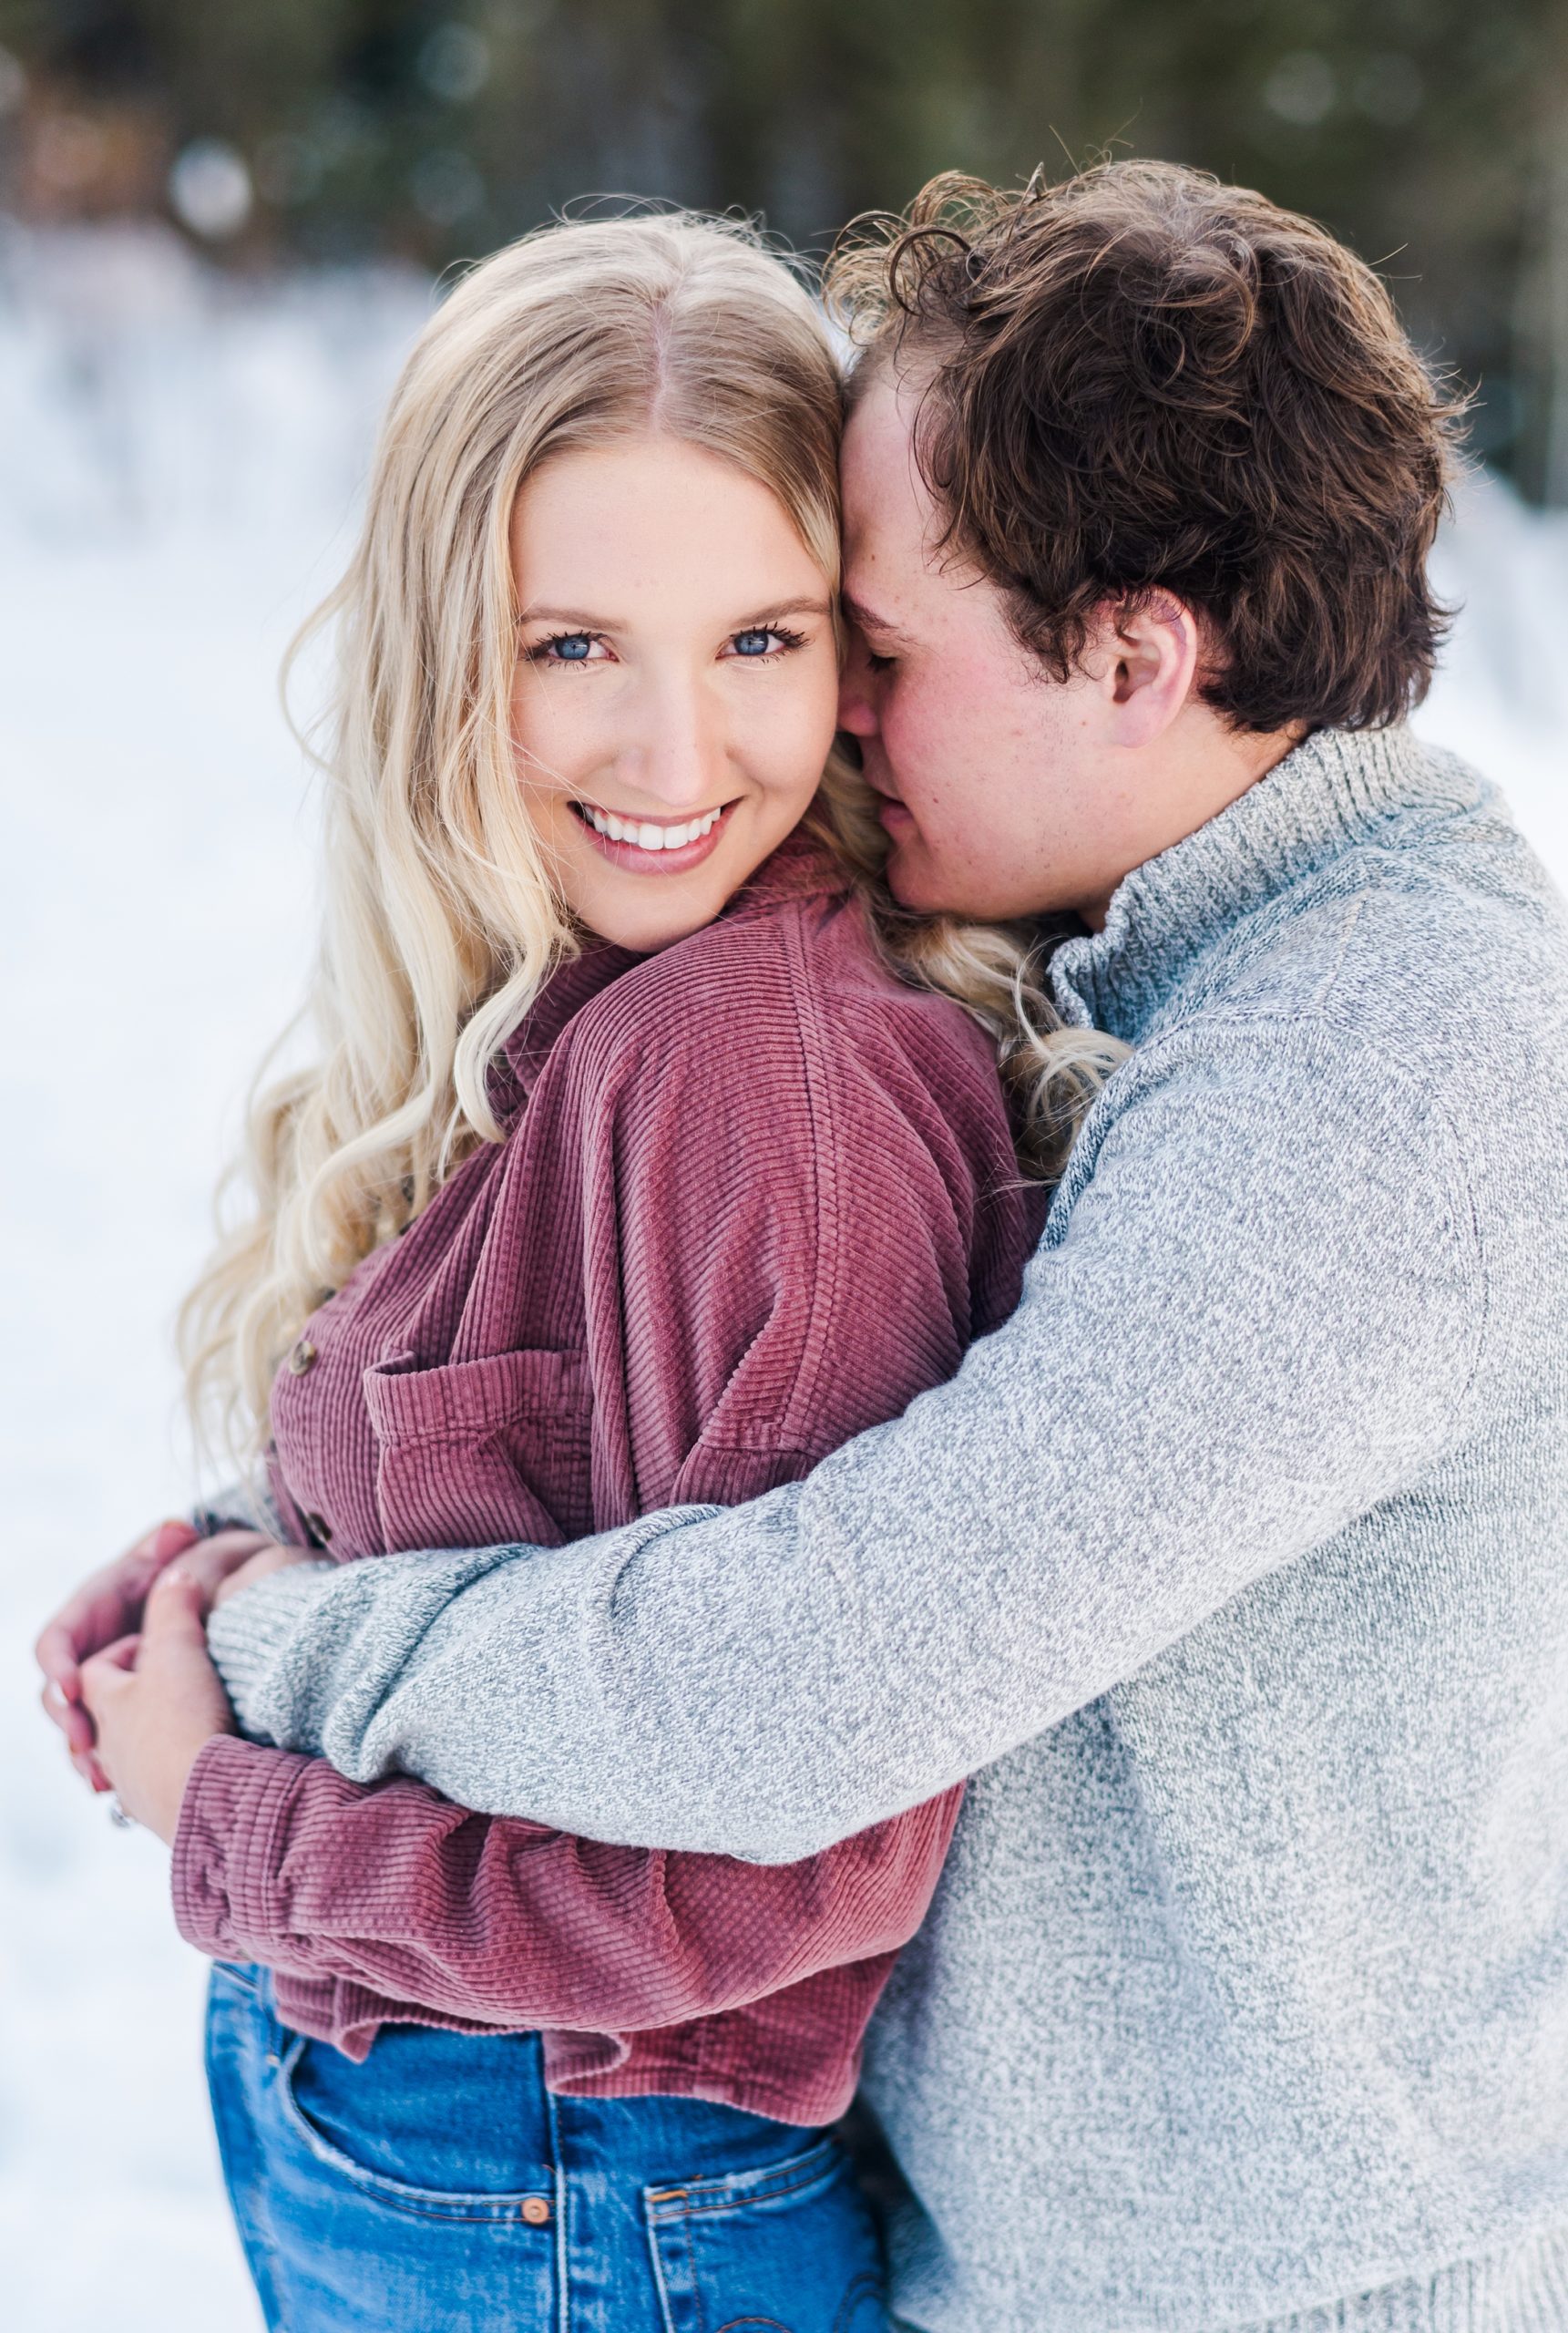 Mountain winter engagement session